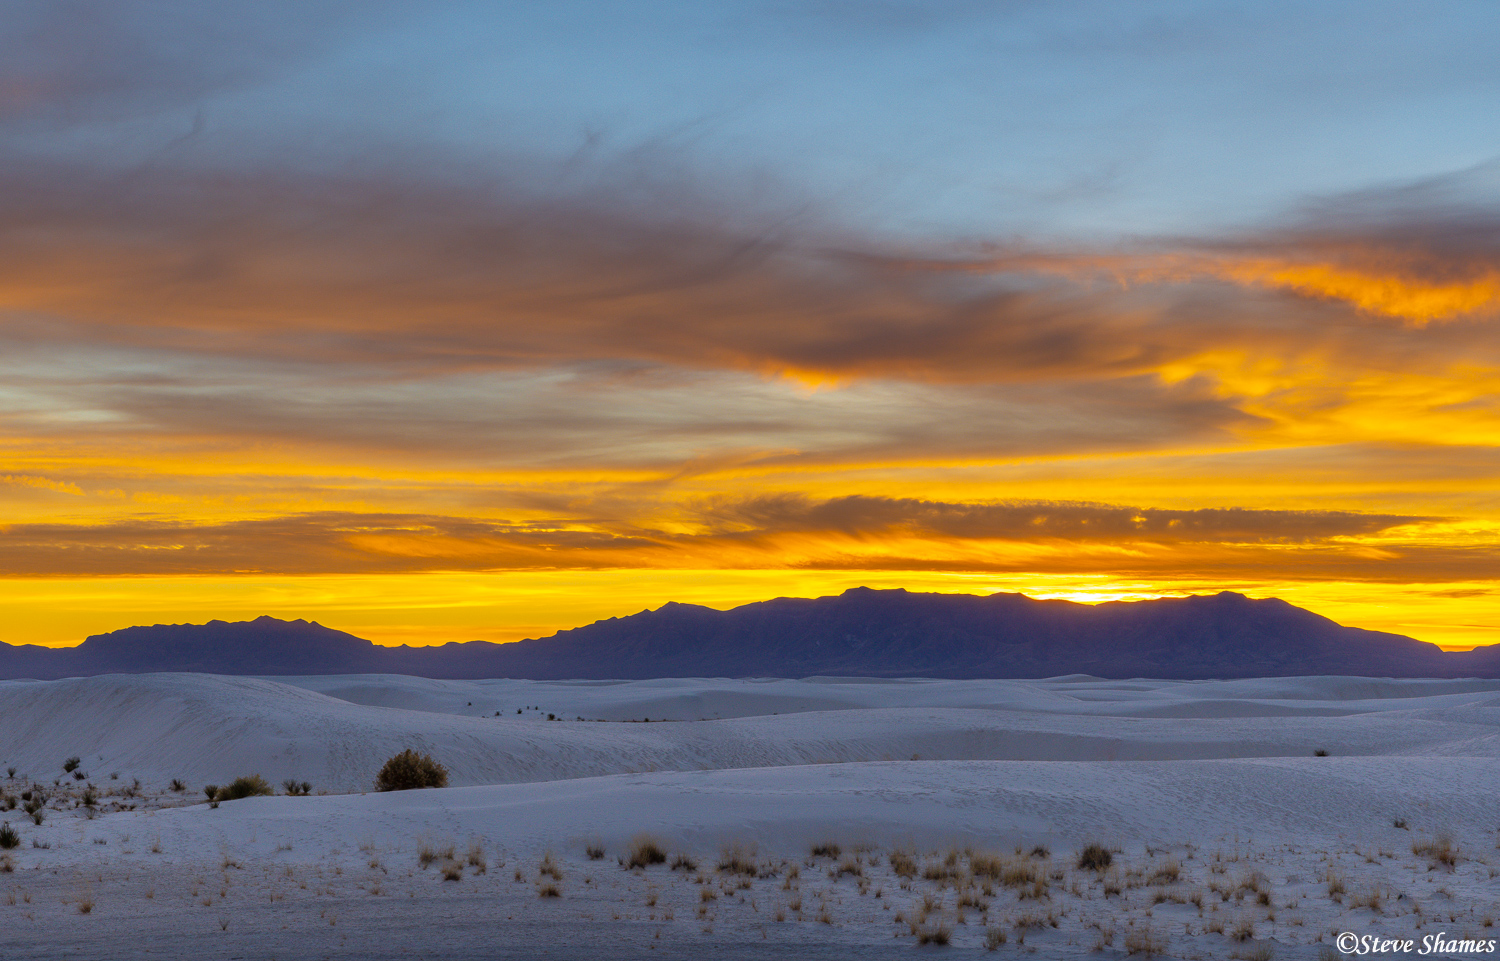 A great New Mexico sunset at White Sands National Monument.